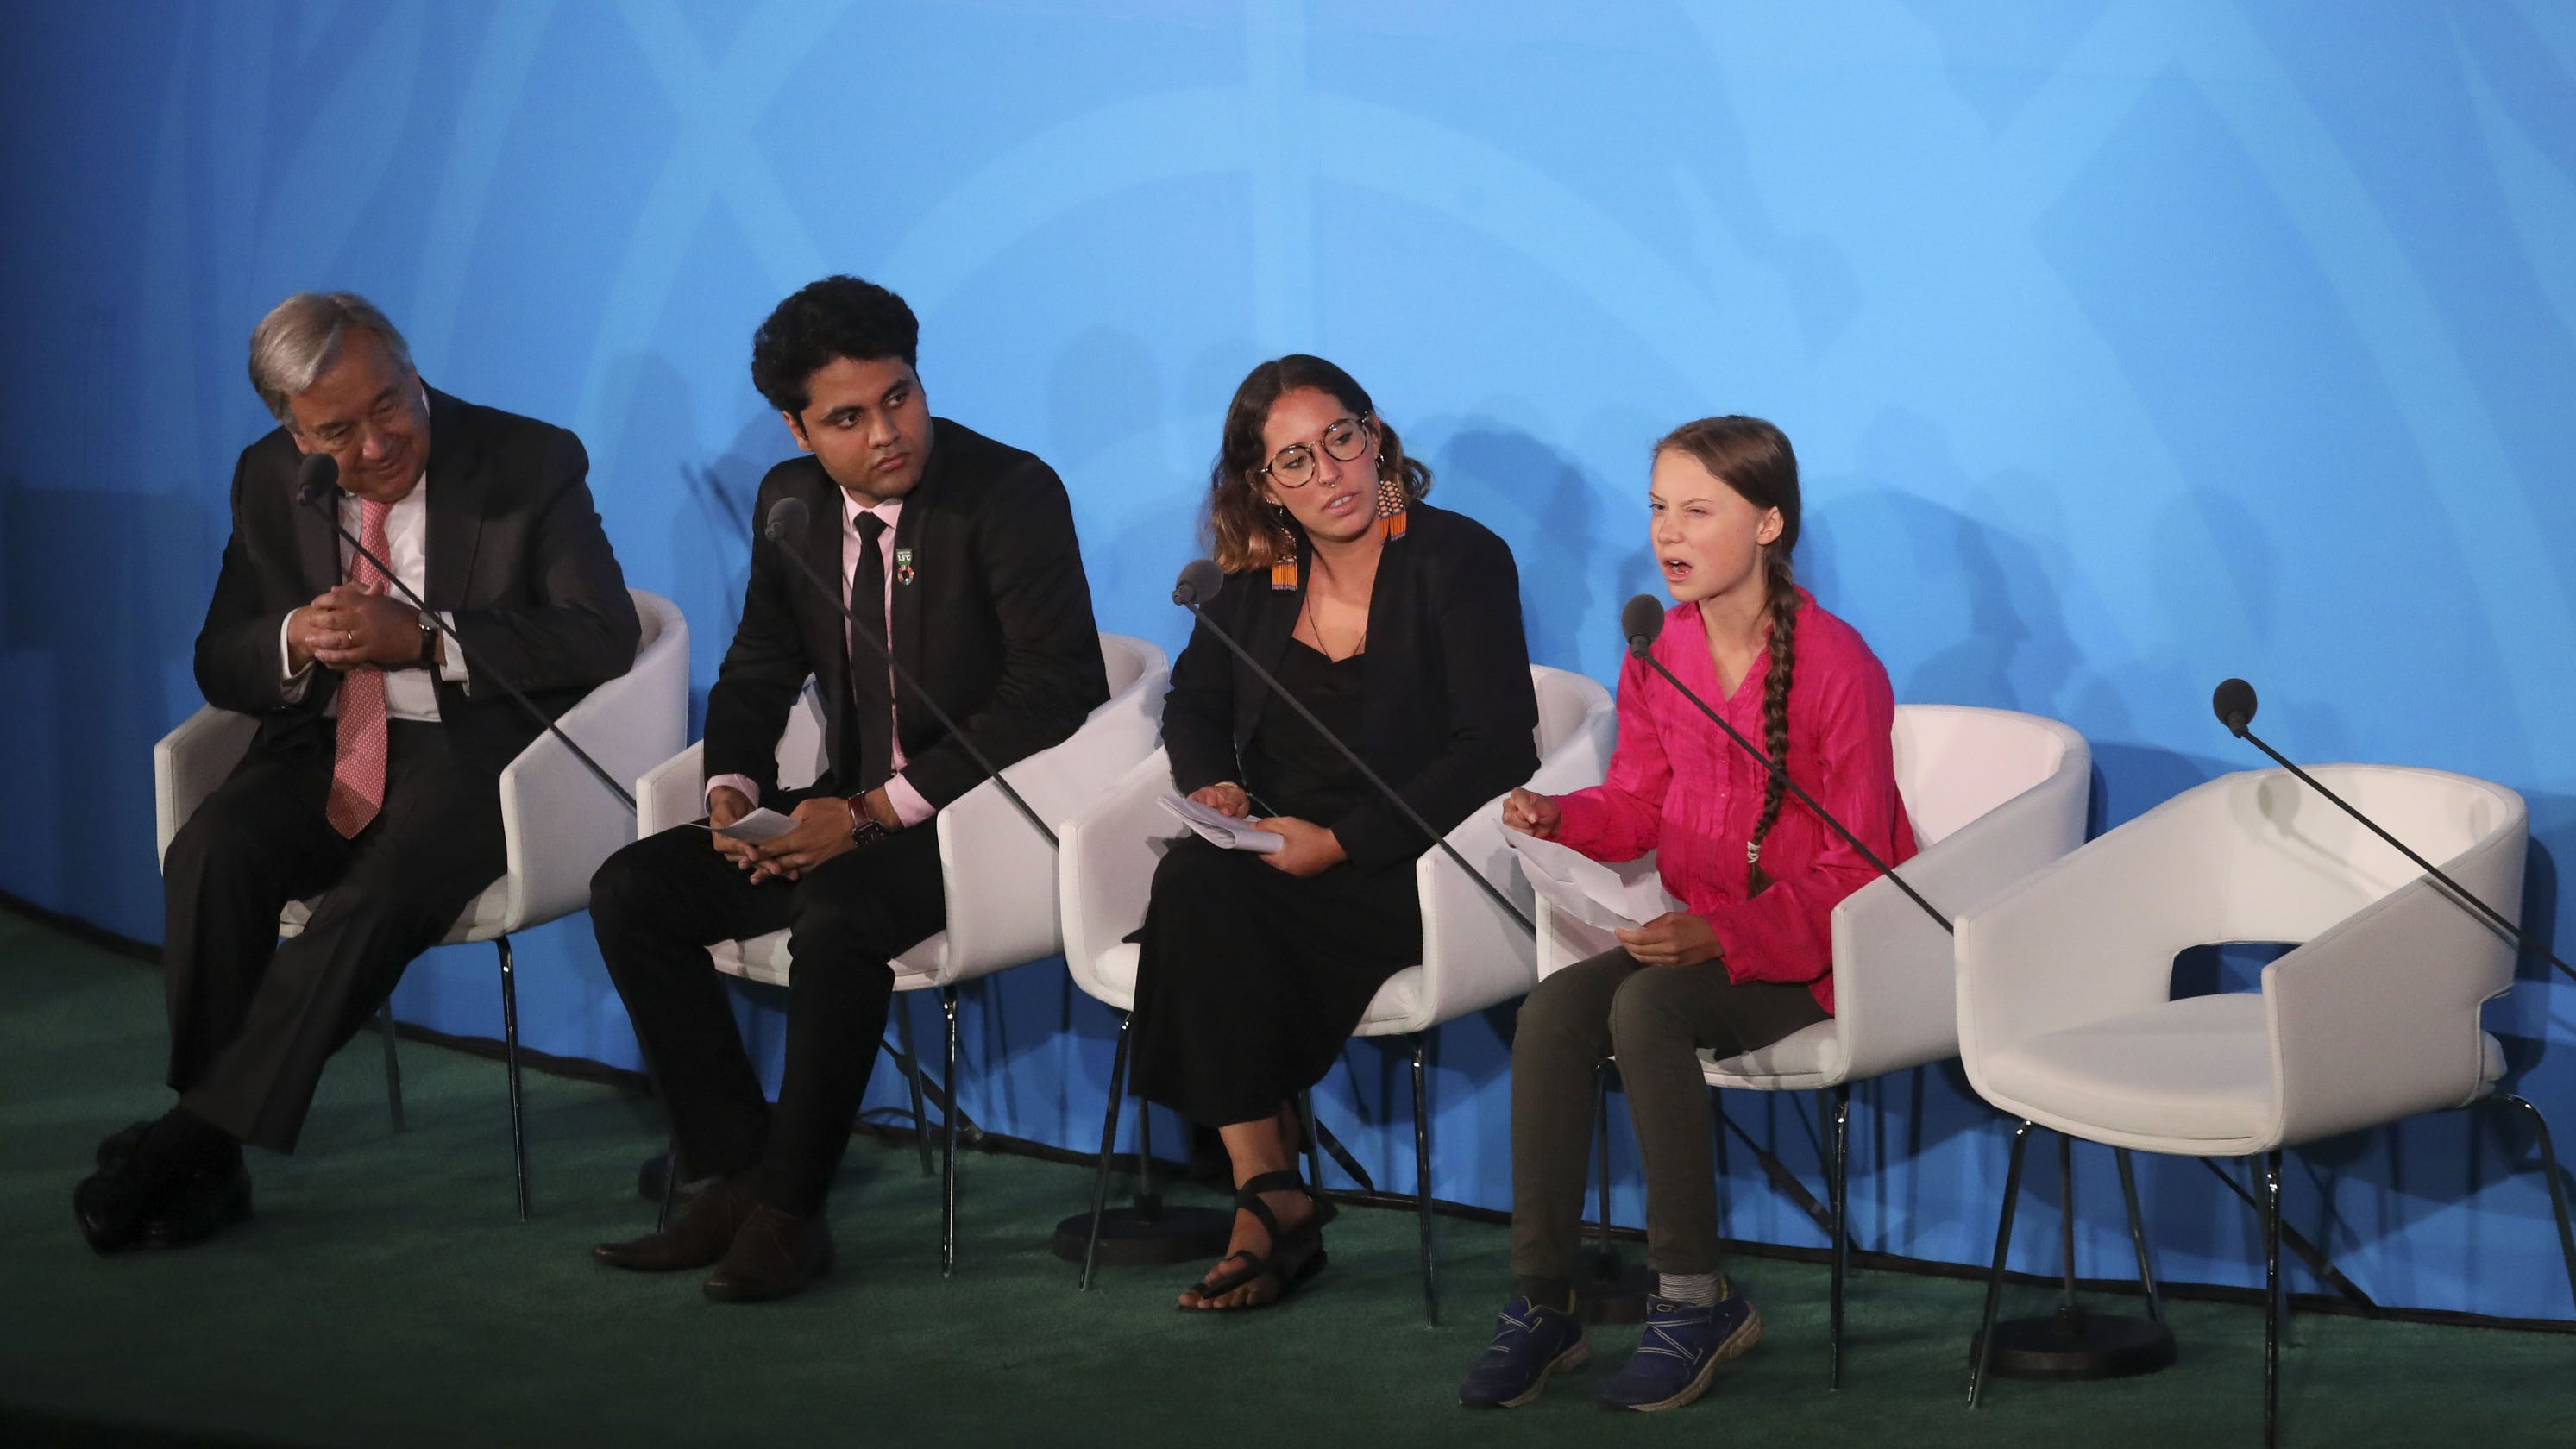 'The eyes of future generations are on you,' Thunberg tells UN Climate Summit - USA TODAY